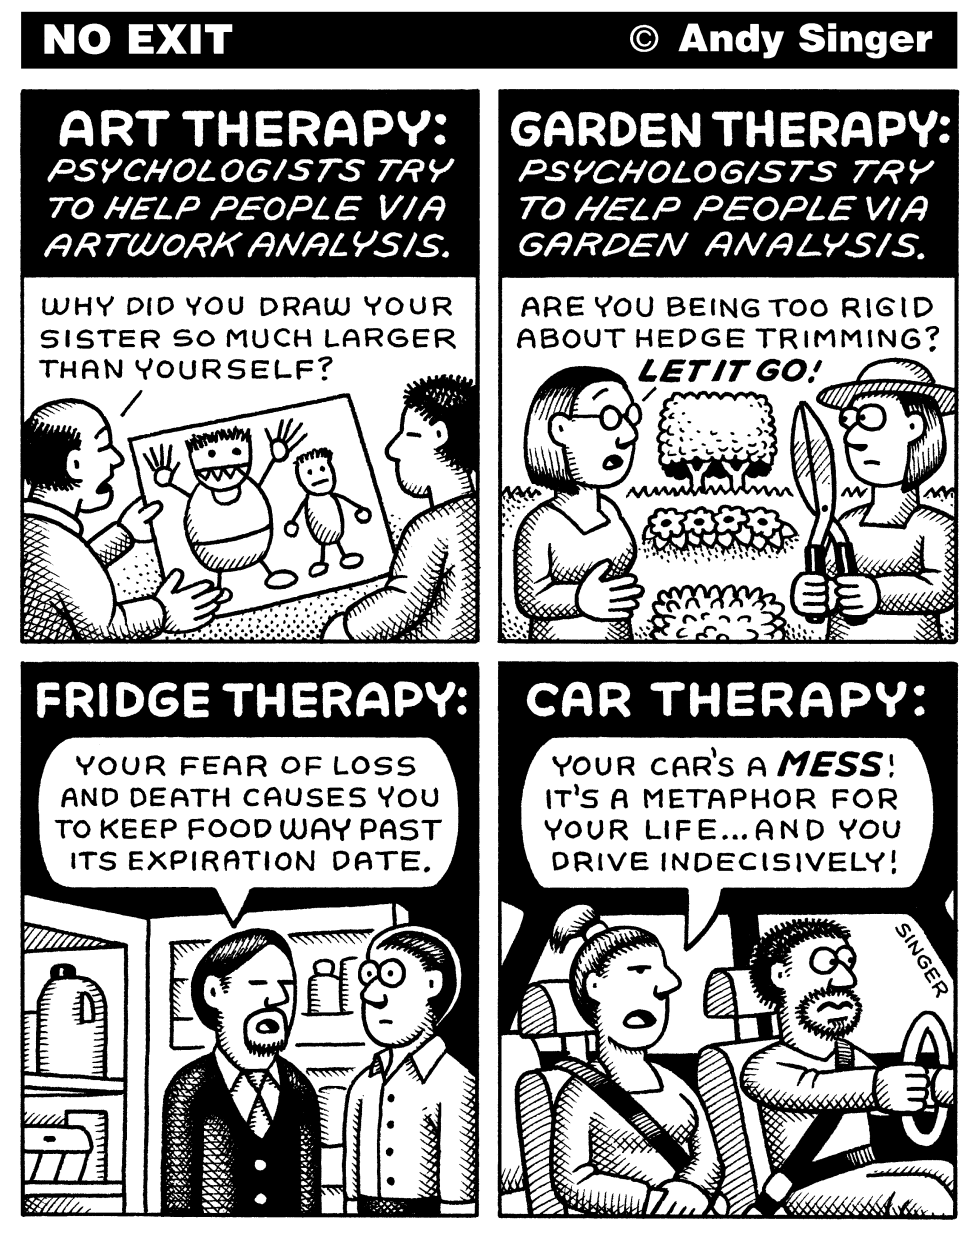 ART GARDEN FRIDGE AND CAR THERAPY by Andy Singer